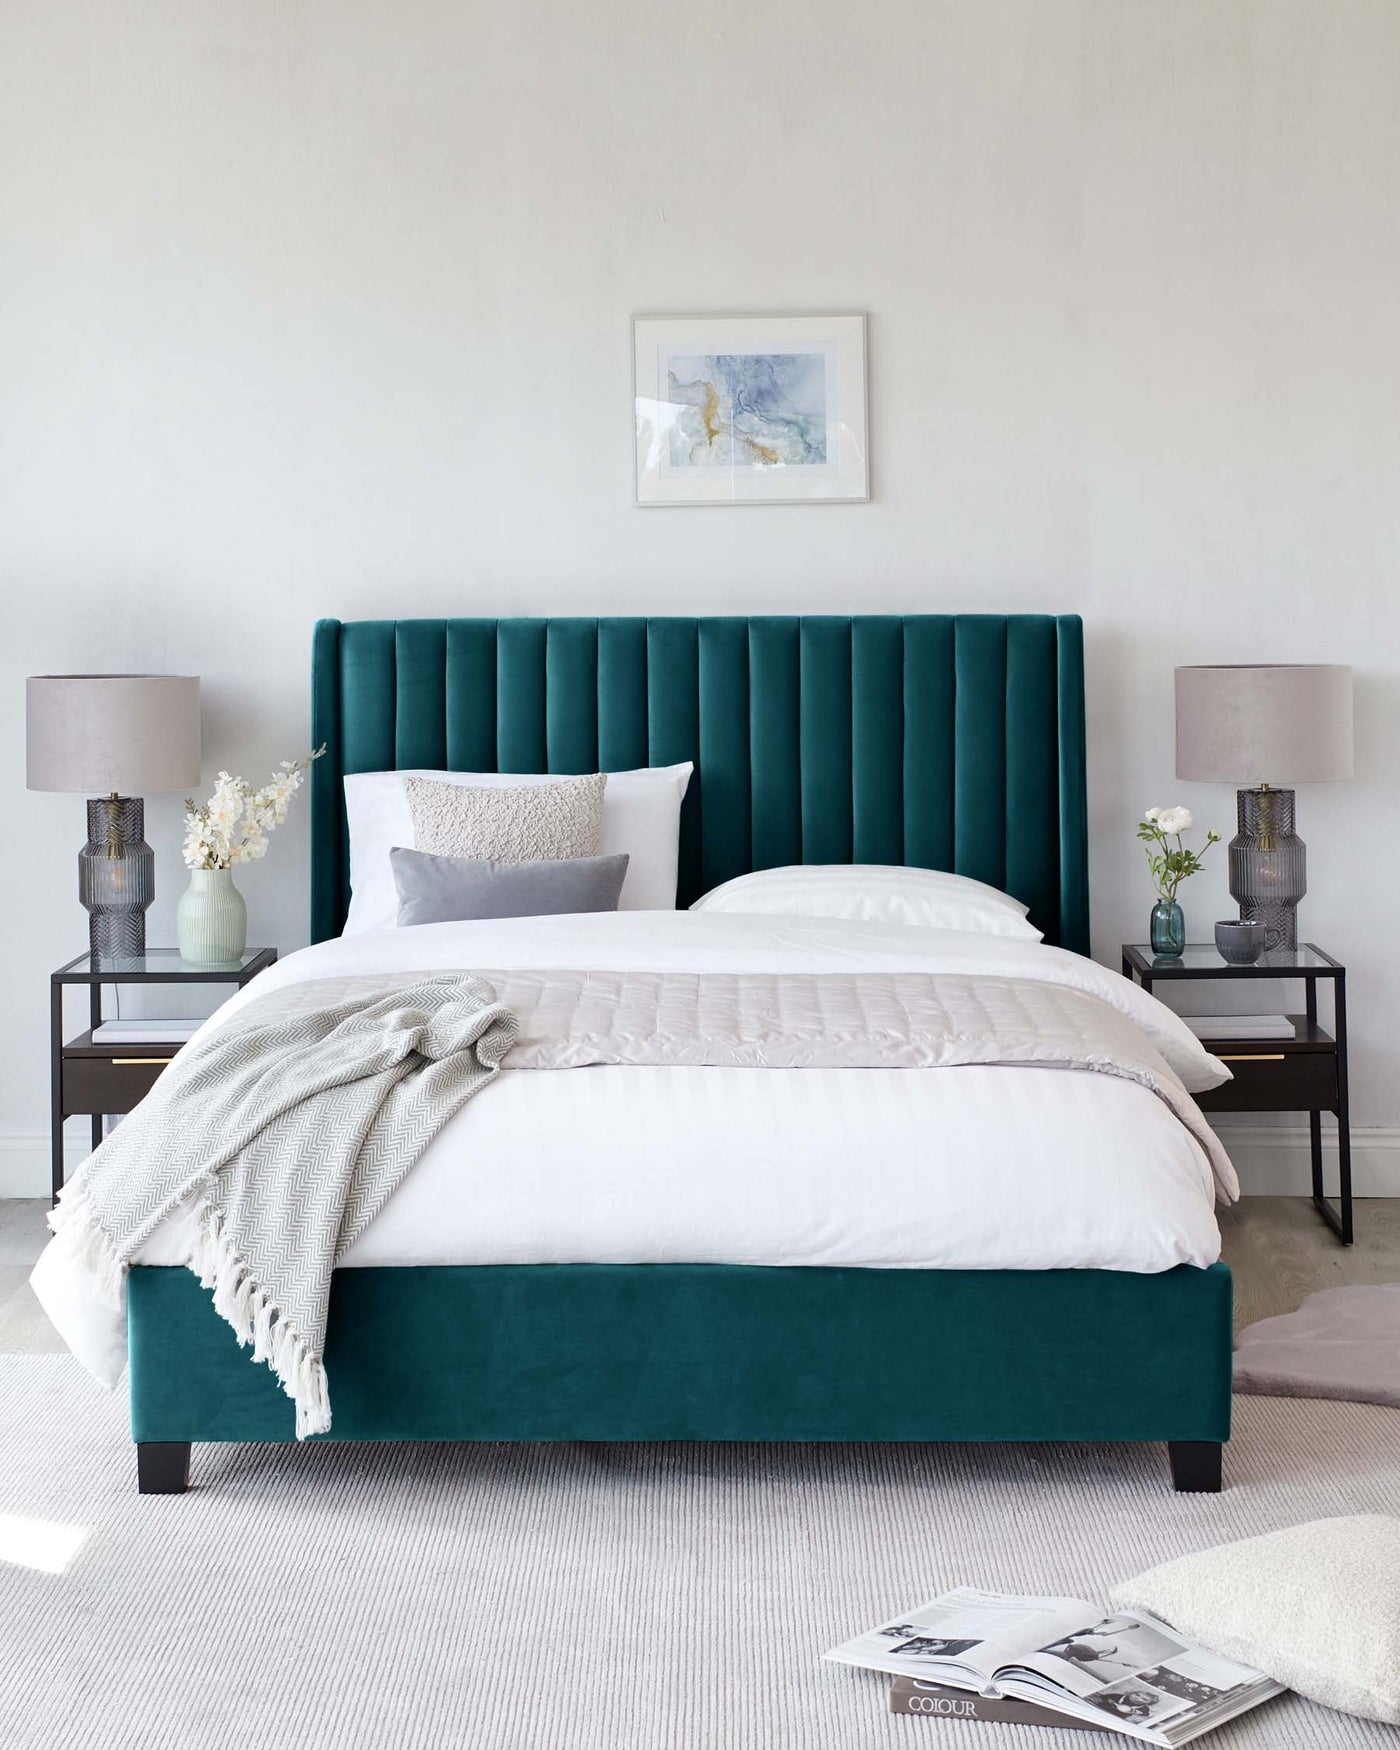 An elegant emerald green upholstered bed with a tall, vertical channel-tufted headboard, flanked by two black metal side tables with glass tops, each adorned with a grey lamp and white floral arrangement.